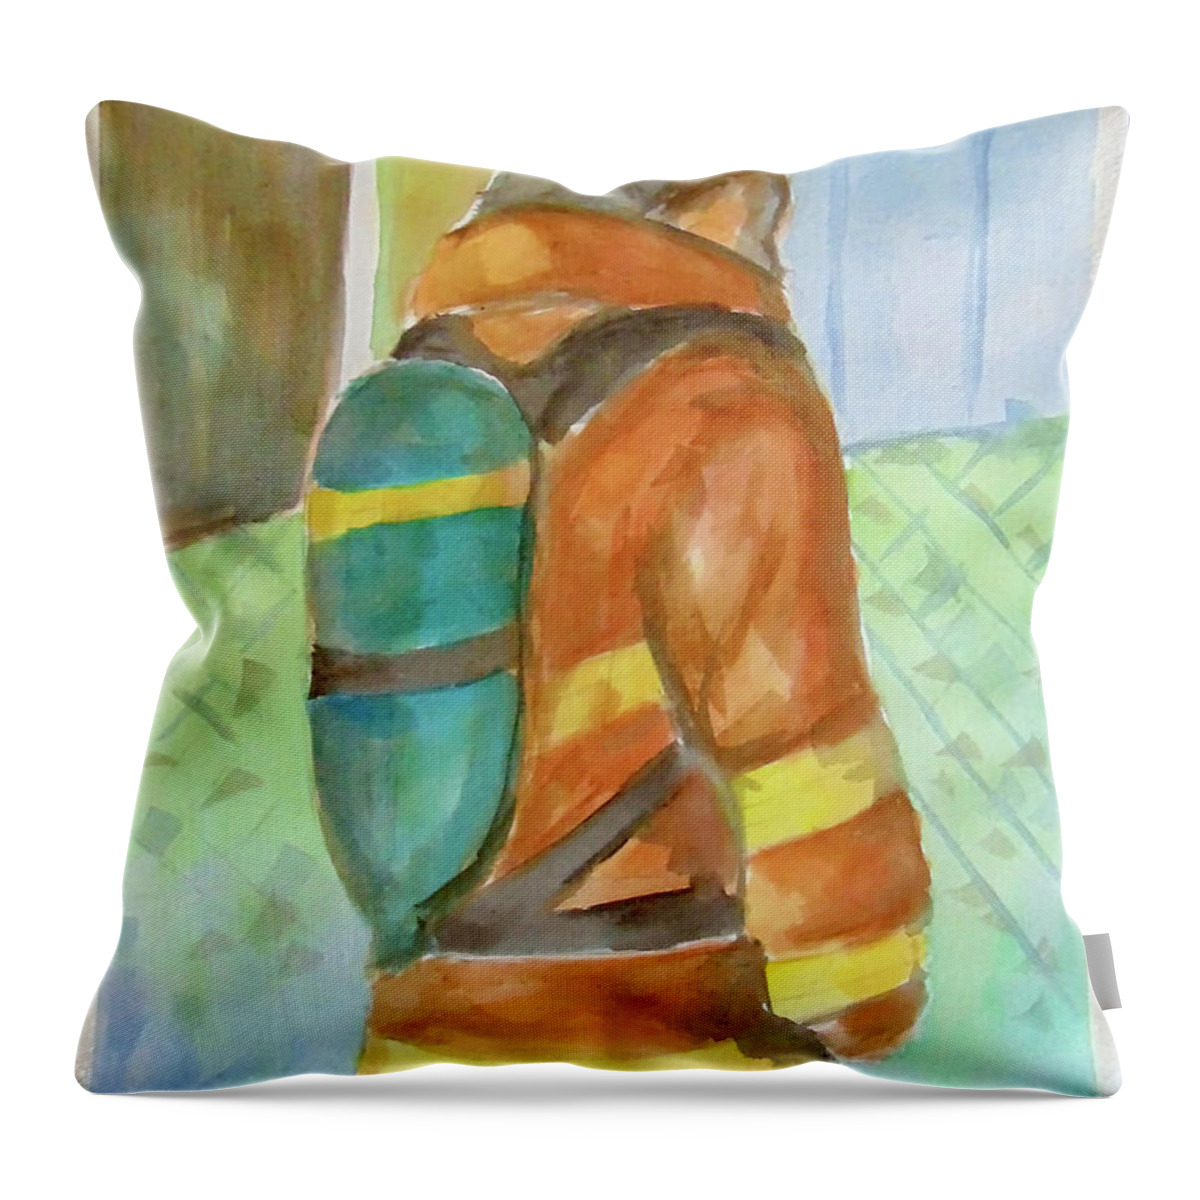 Art Throw Pillow featuring the painting Fireman by Loretta Nash